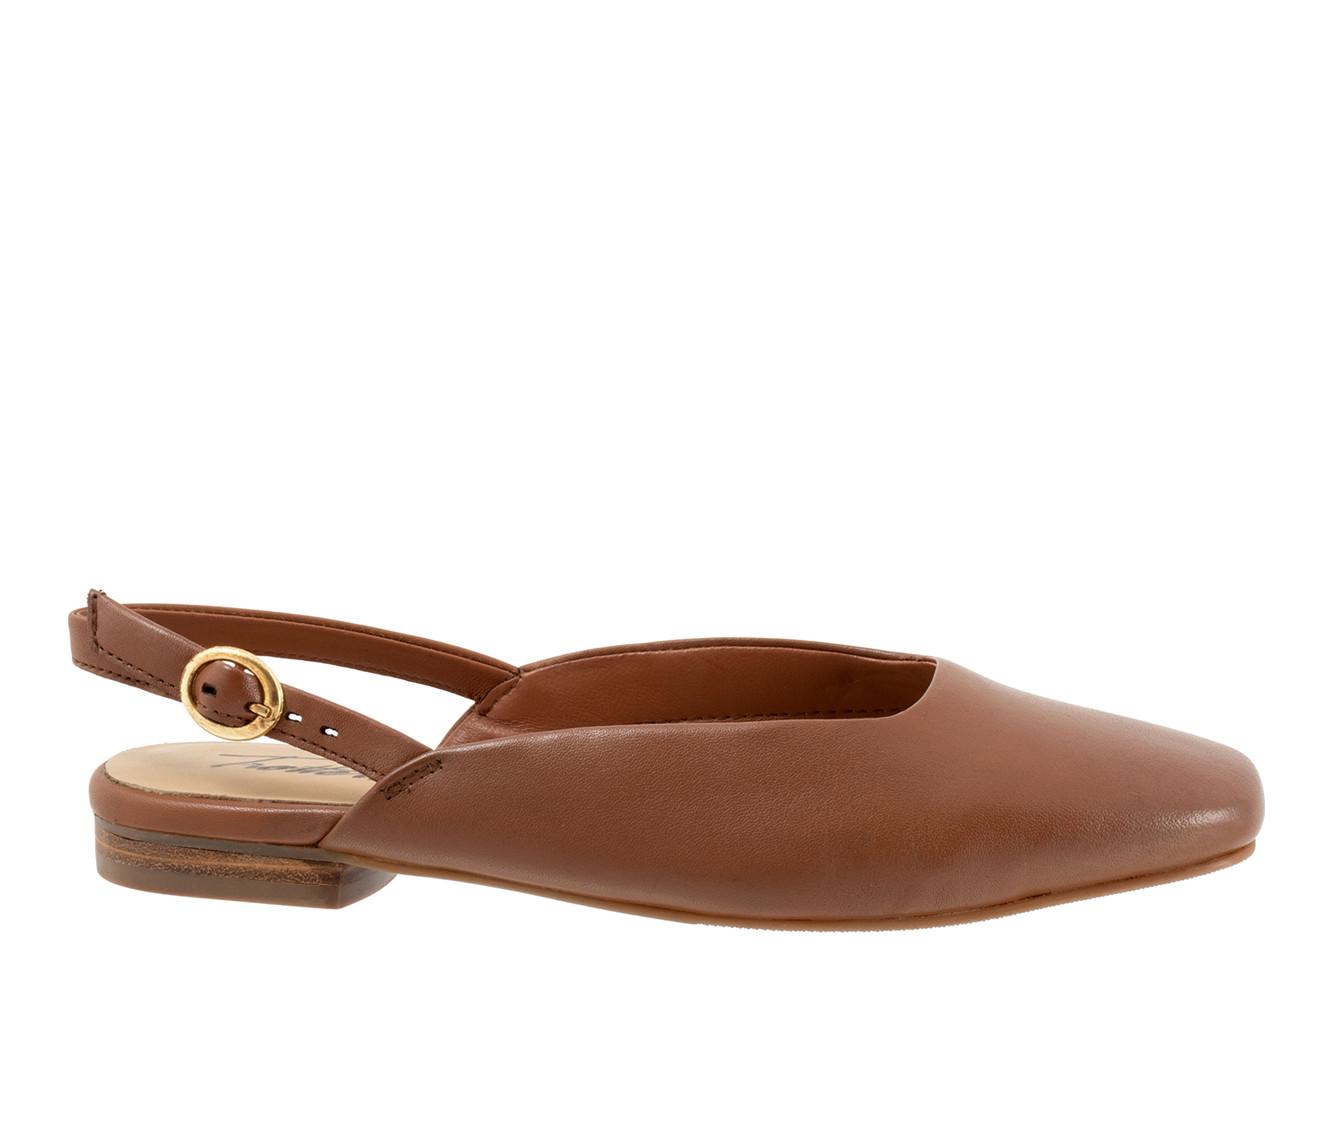 Women's Trotters Holly Slingback Flats